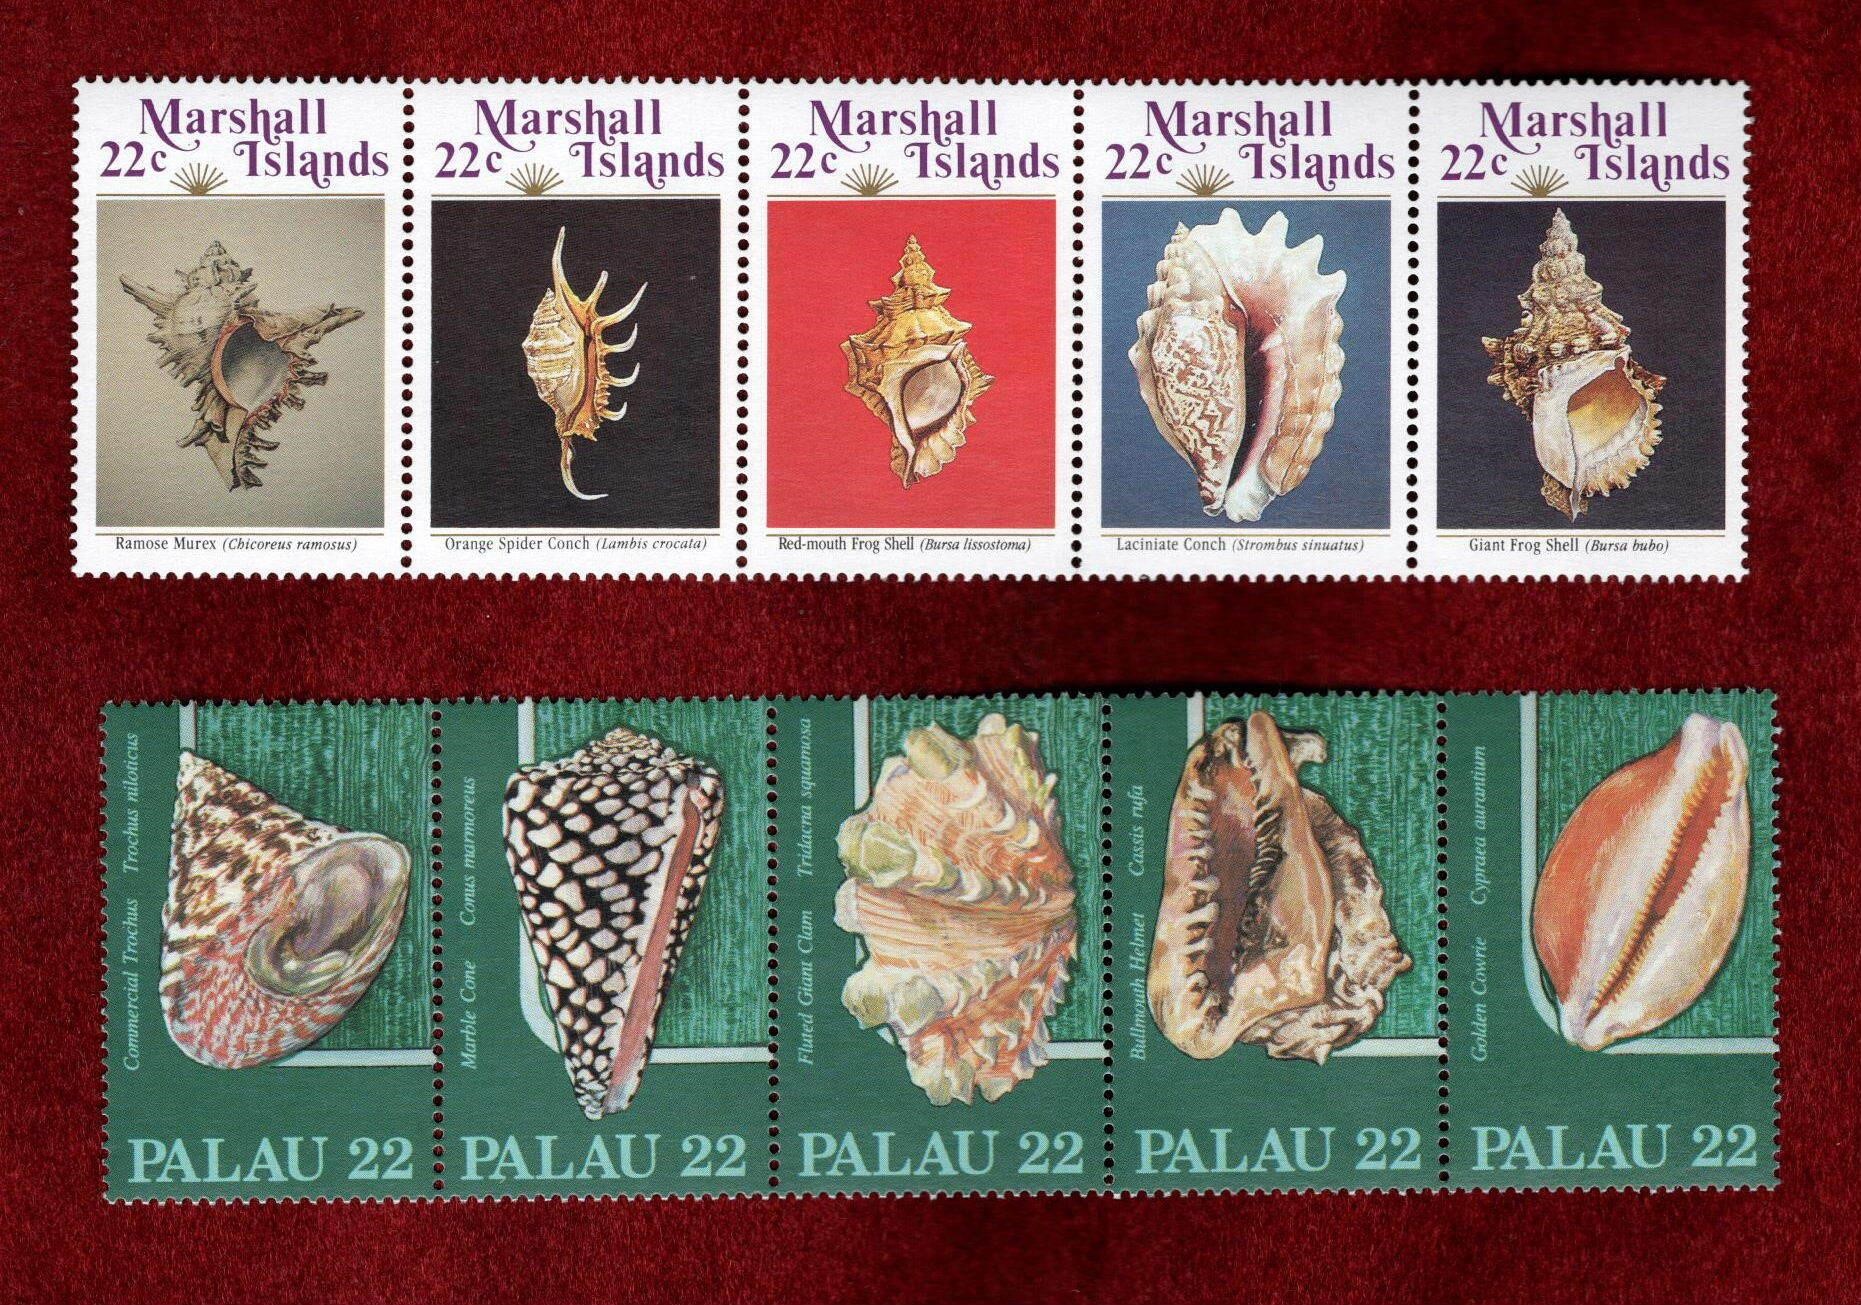 SEASHELL 2 DIFF MNH STRIPS OF 5 STAMPS